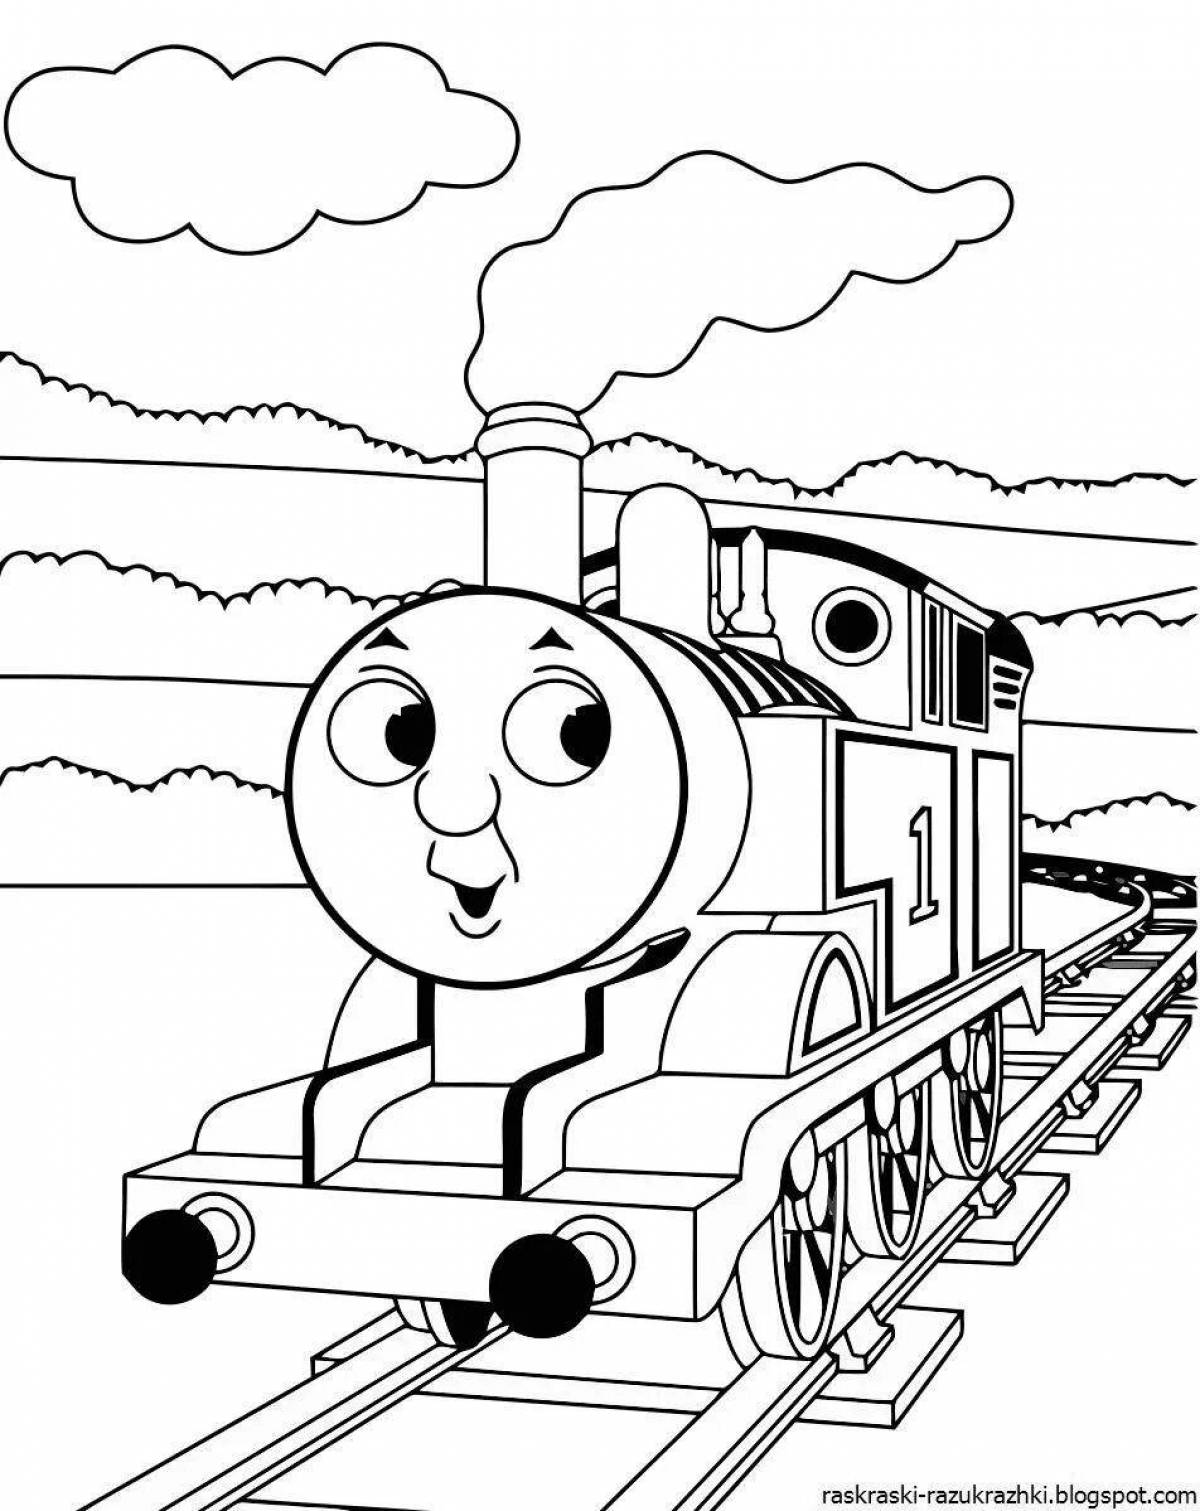 Exquisite train coloring for boys